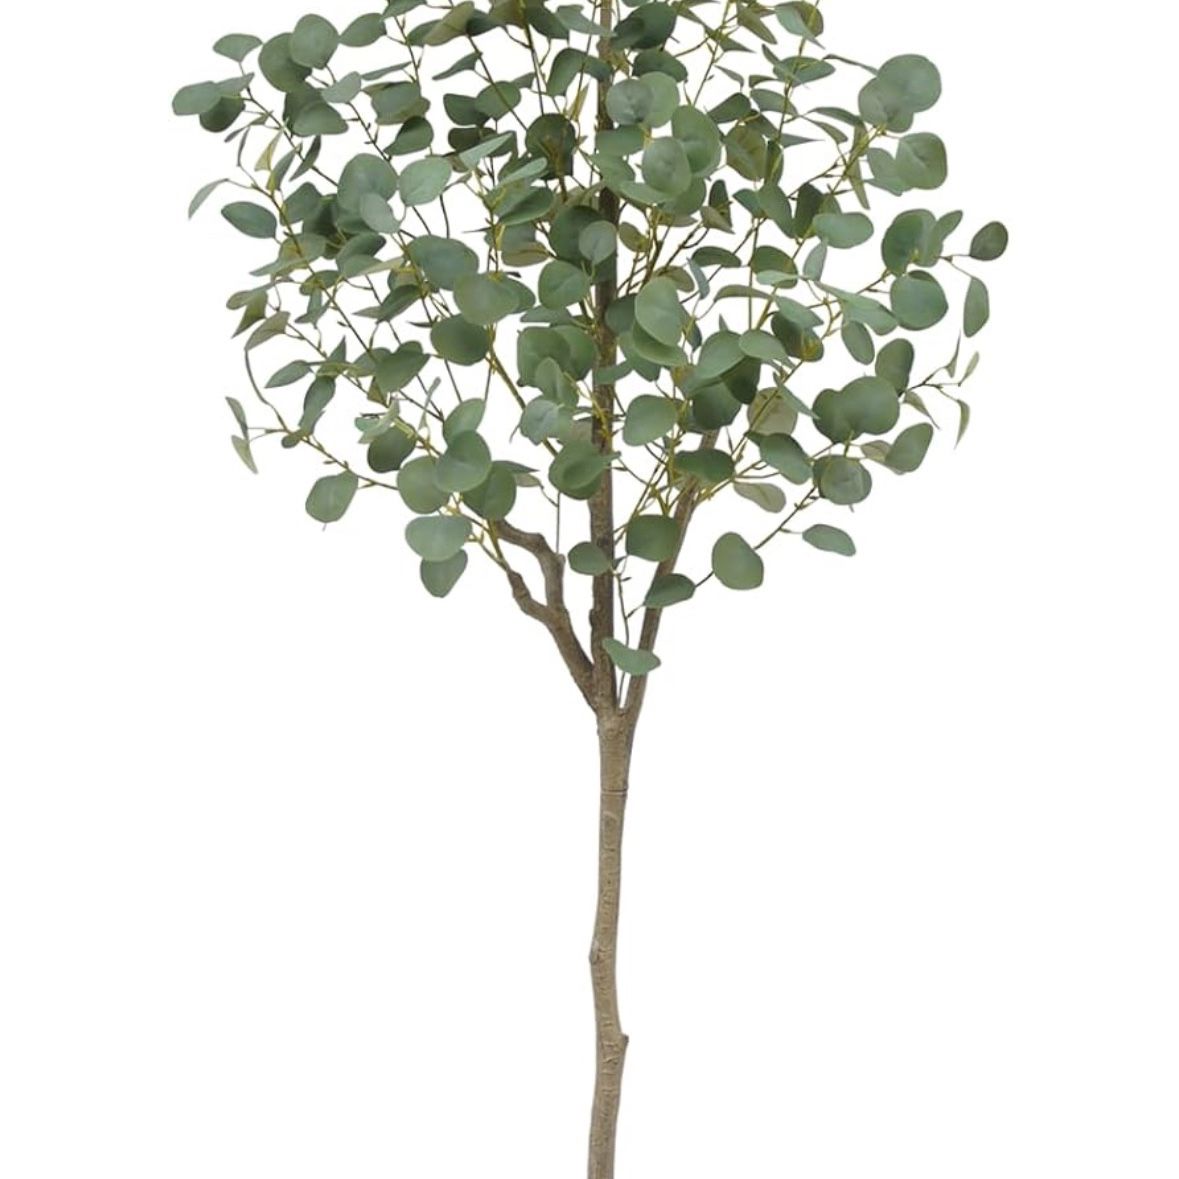 Artificial Eucalyptus Tree 6FT, 72in Tall Fake Eucalyptus Plant in Pot, Green Silver Dollars Silk Leaves Faux Tree for Home Office Livingroom Decor